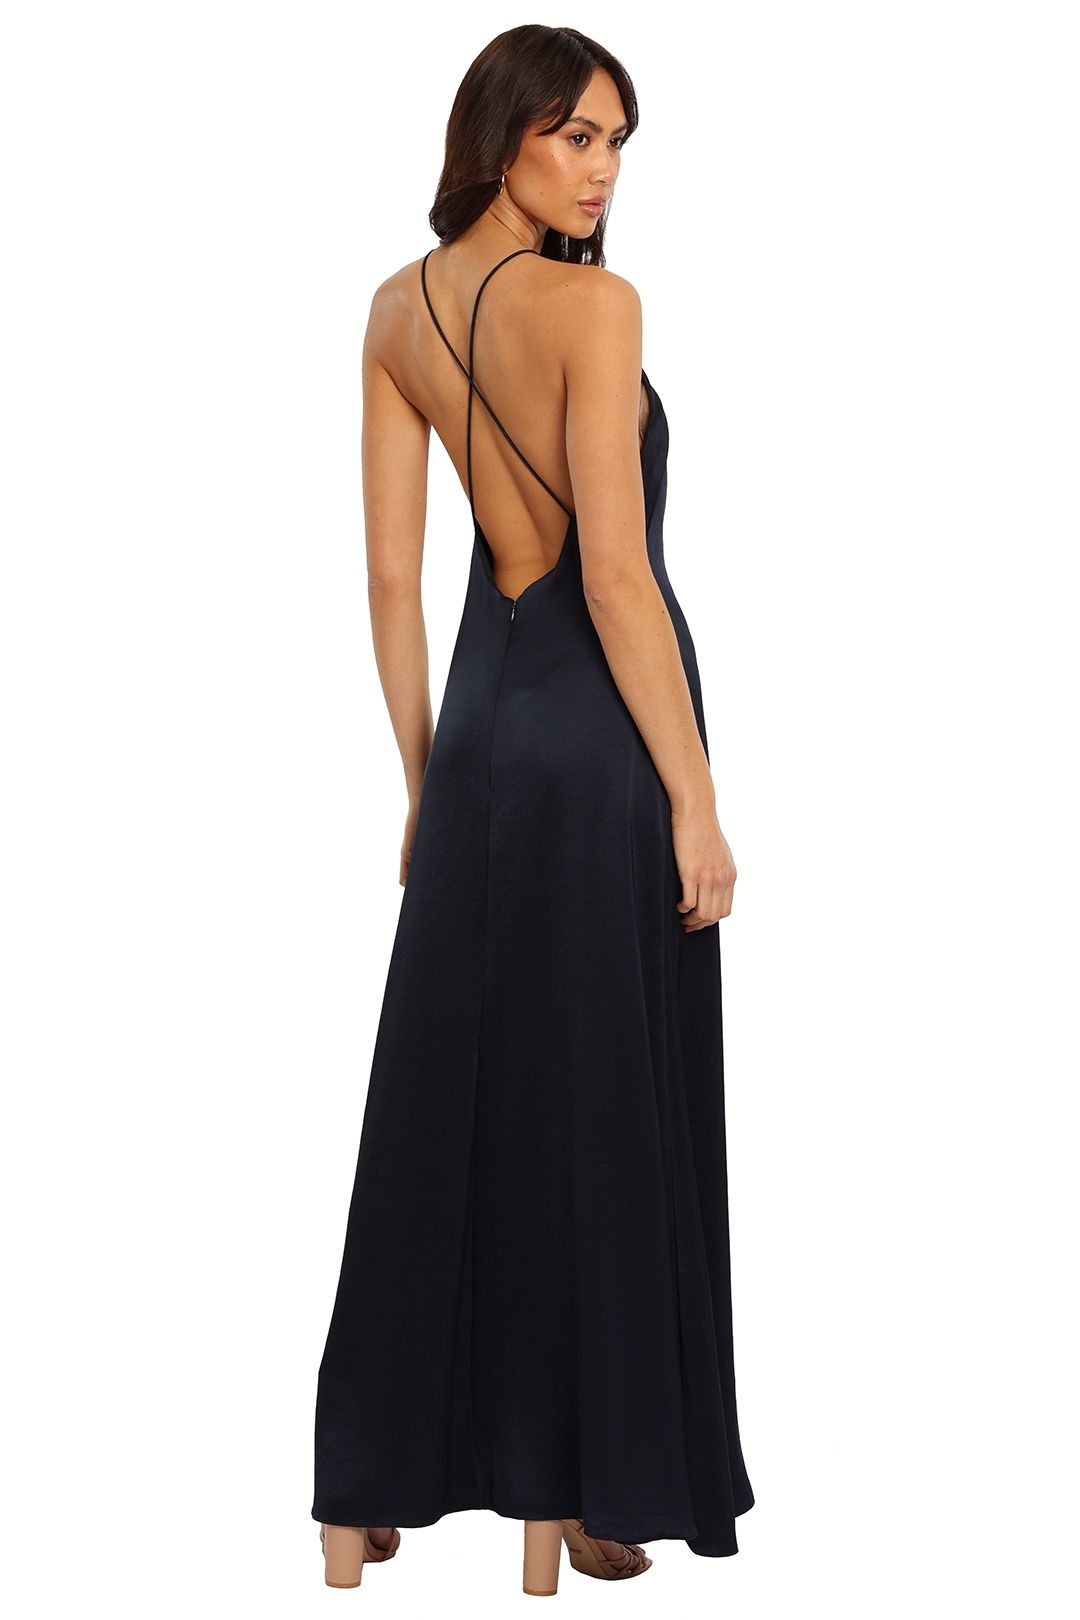 Camilla and Marc Garbo X Back Dress Backless